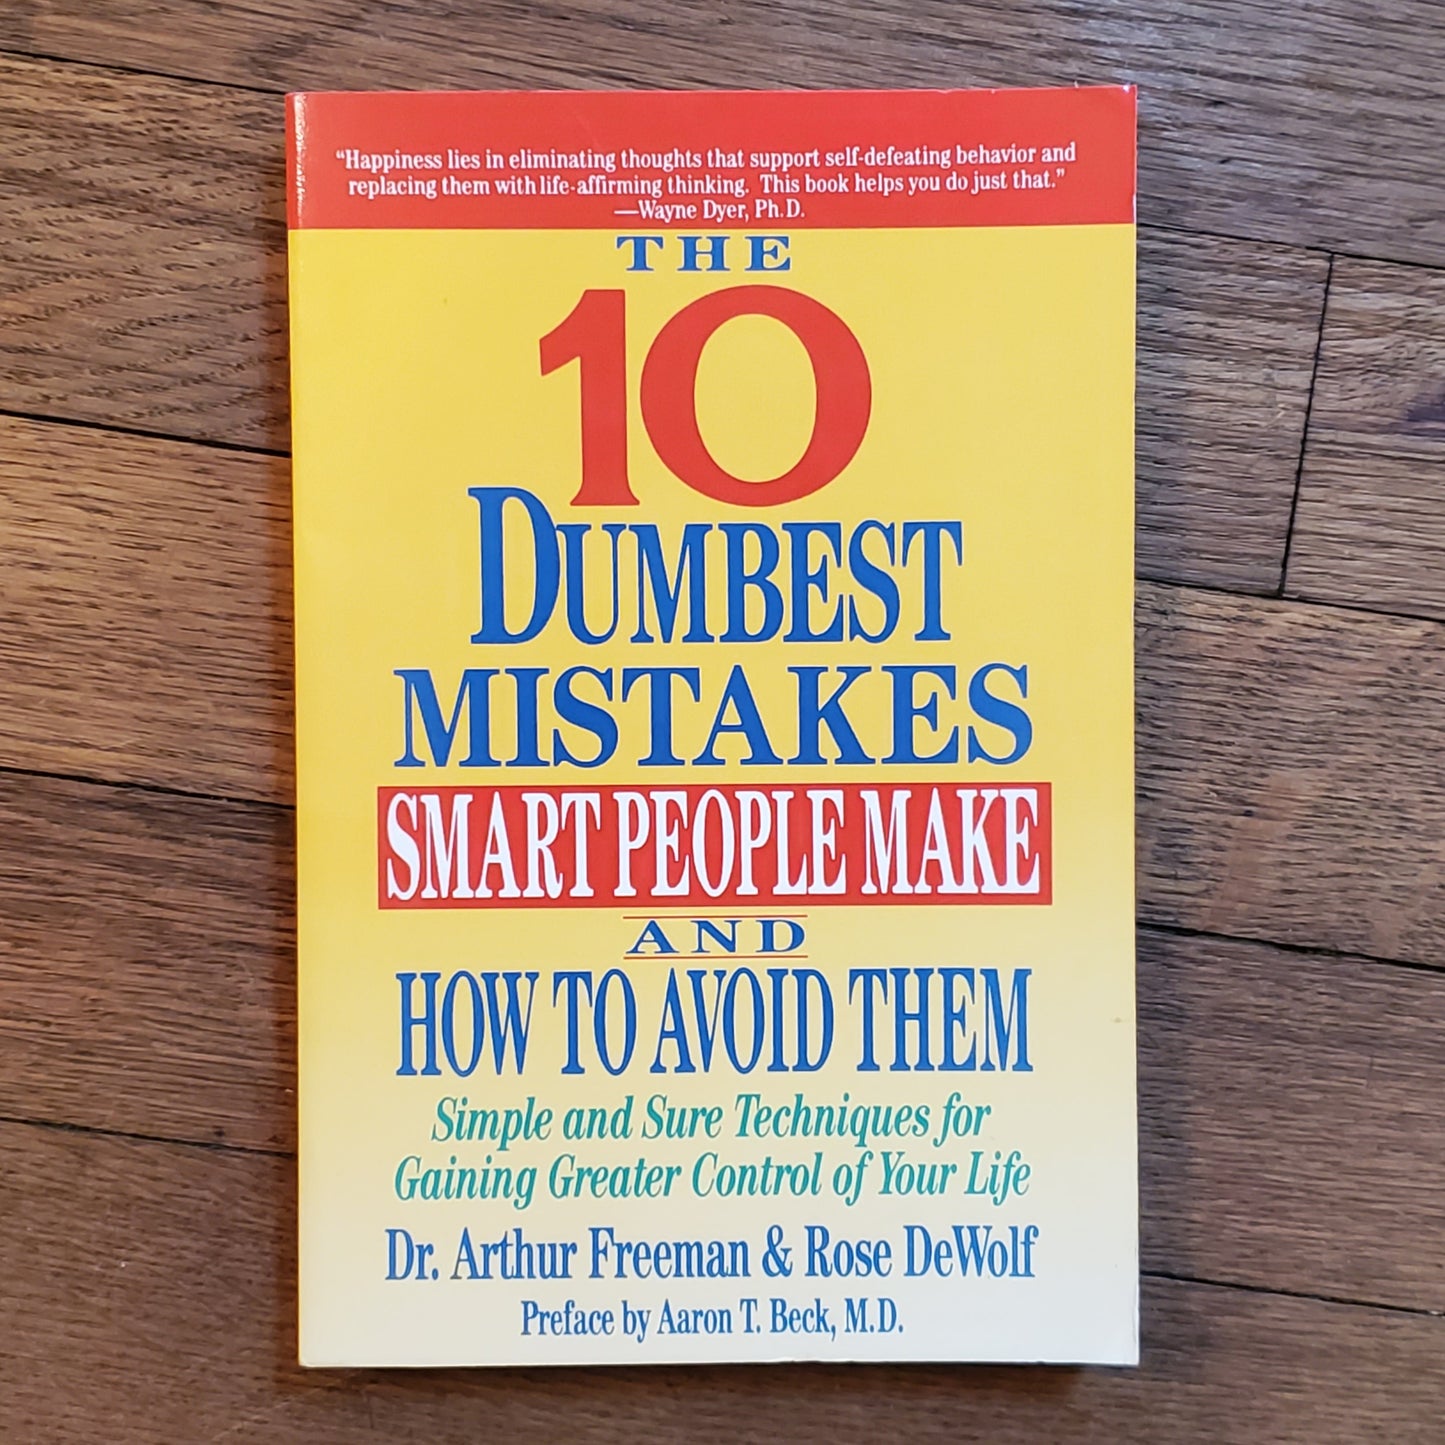 The 10 Dumbest Mistakes Smart People Make and How to Aviod Them